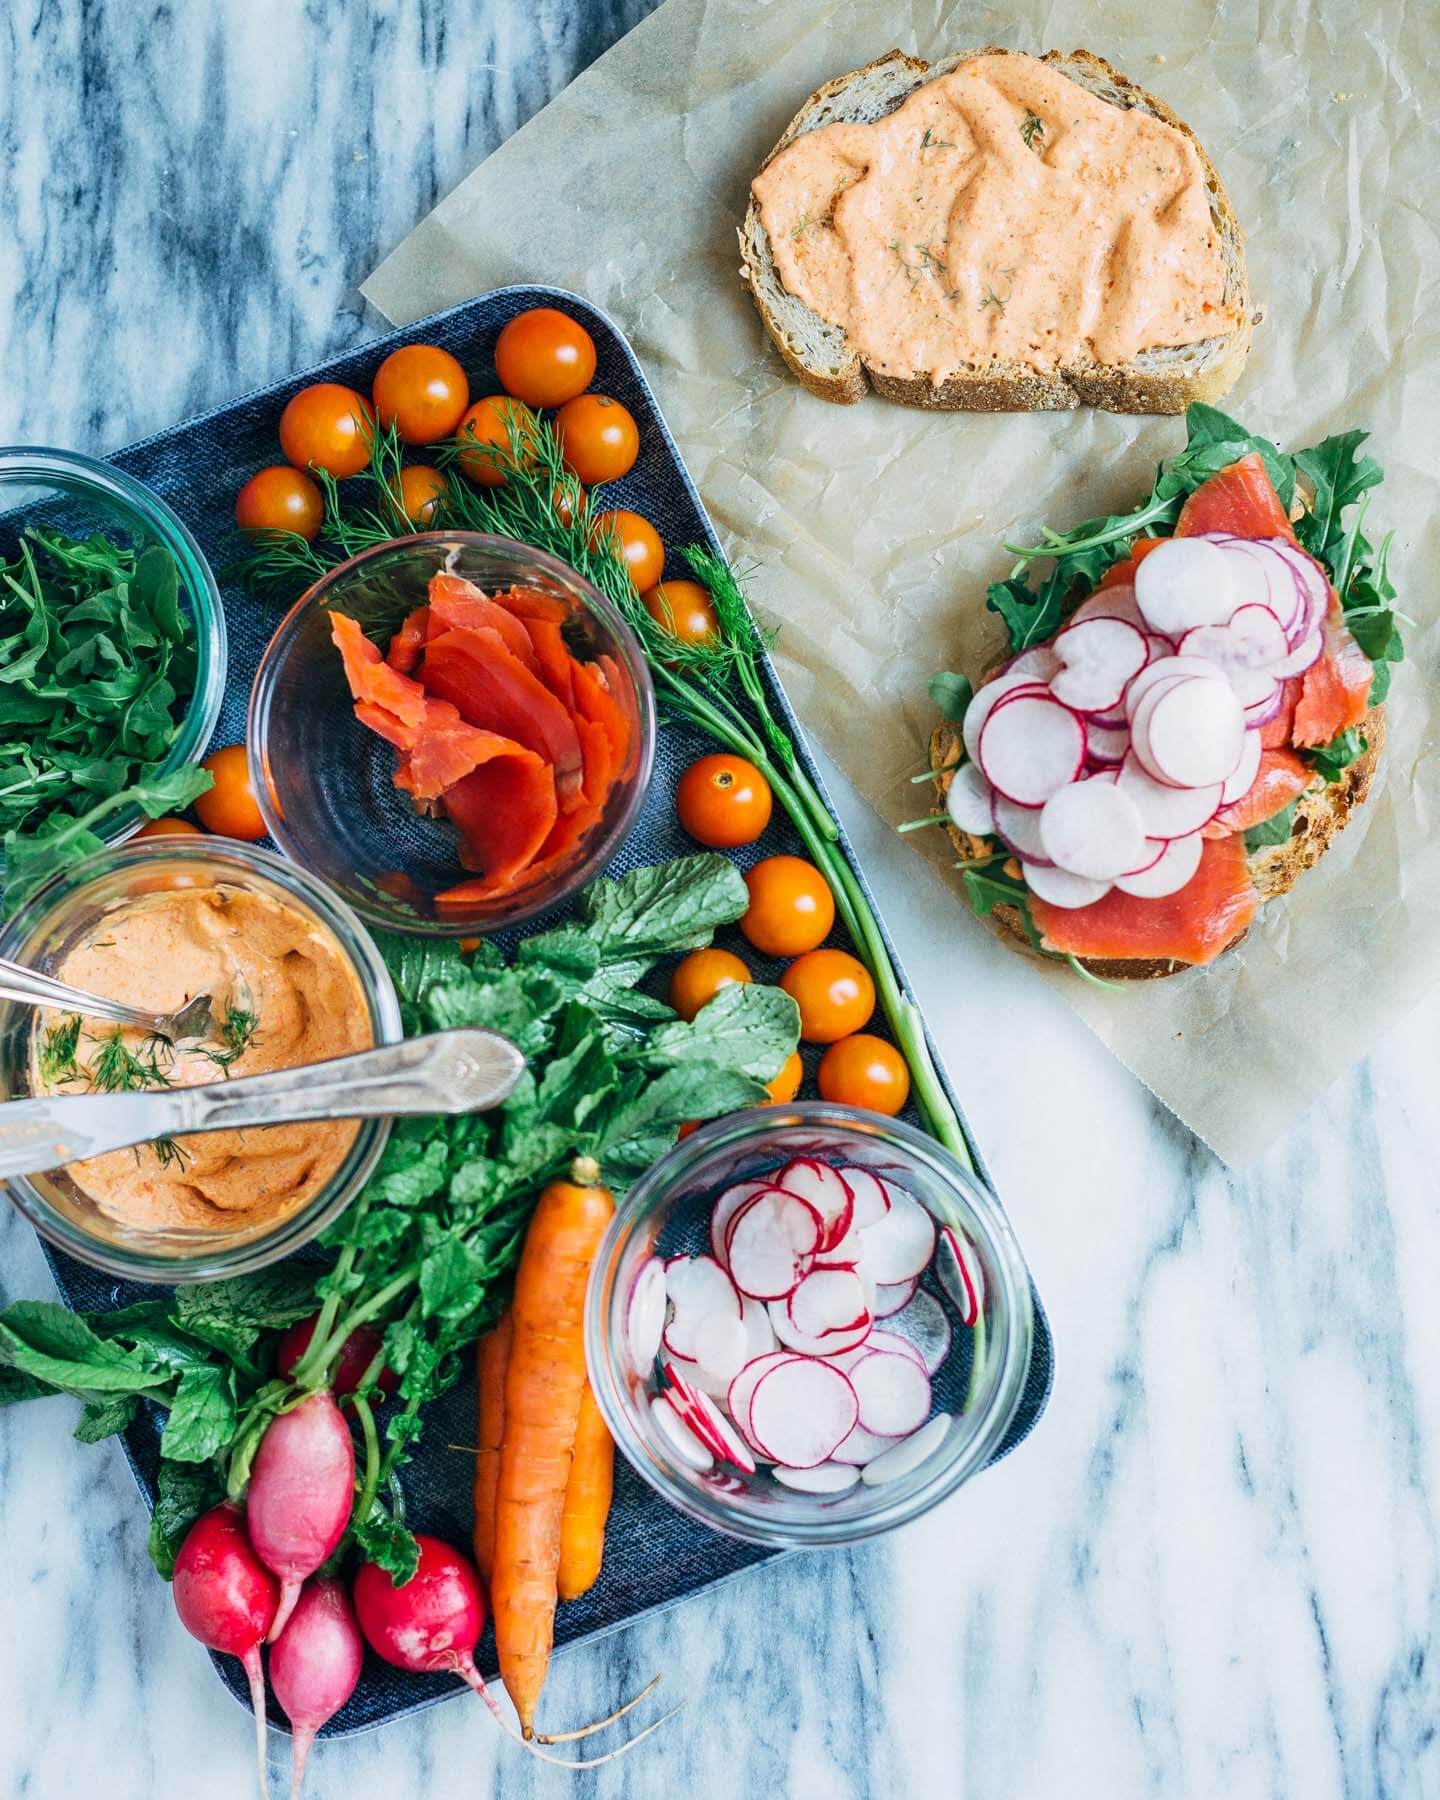 roasted red pepper and smoked salmon sandwiches // brooklyn supper